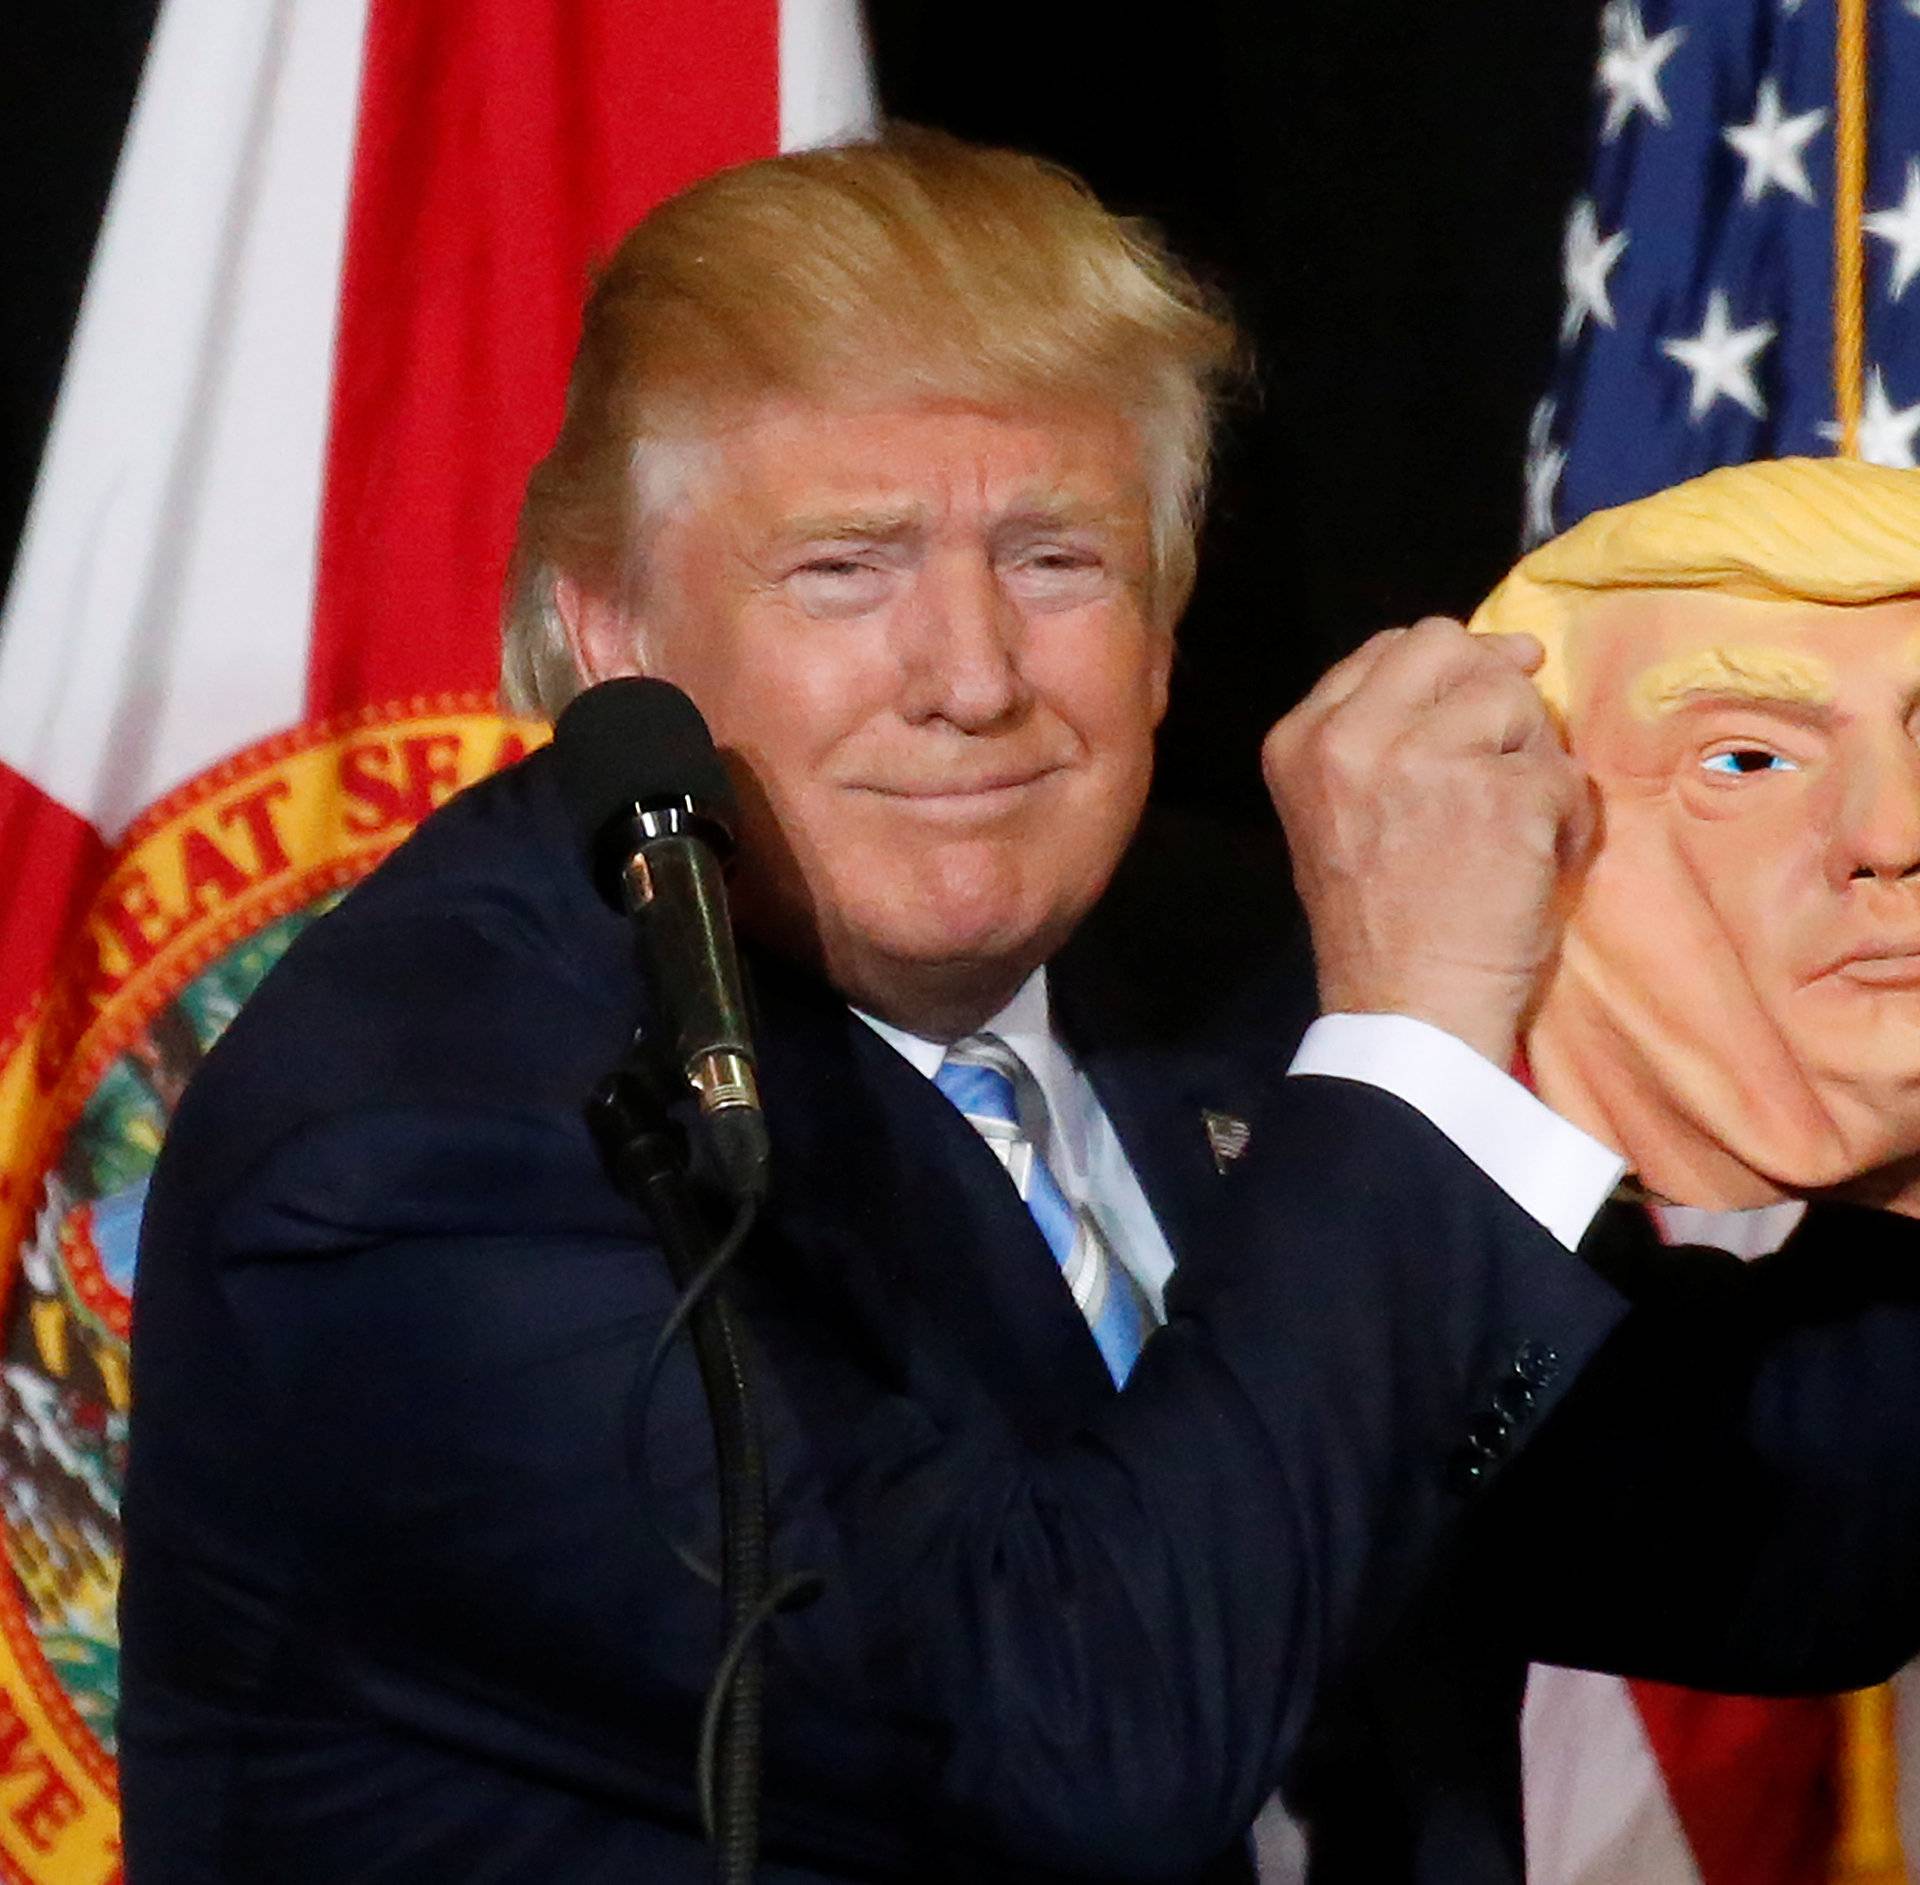 Republican presidential nominee Donald Trump holds up a mask of himself as he speaks during a campaign rally in Sarasota